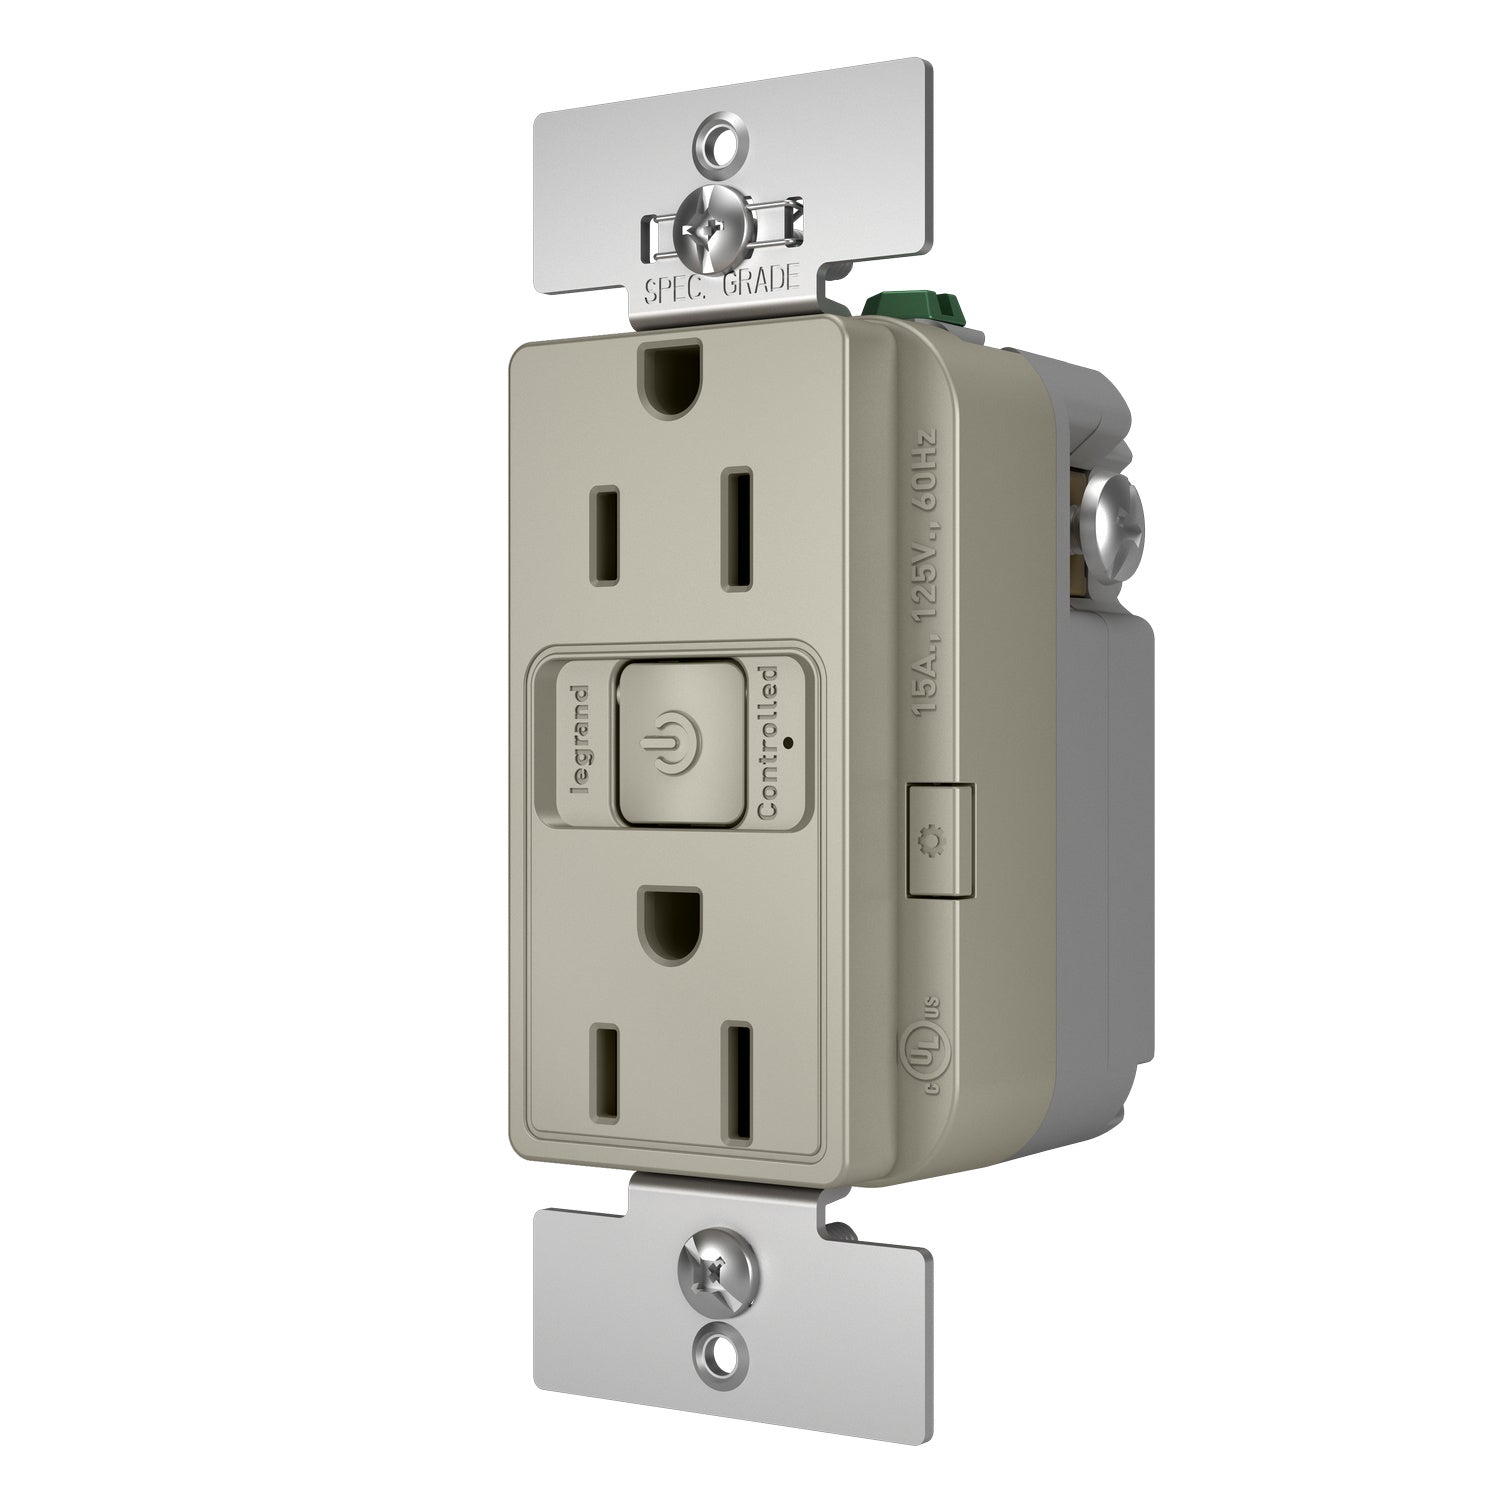 Legrand Canada - WNRR15NI - 15A Outlet - Nickel